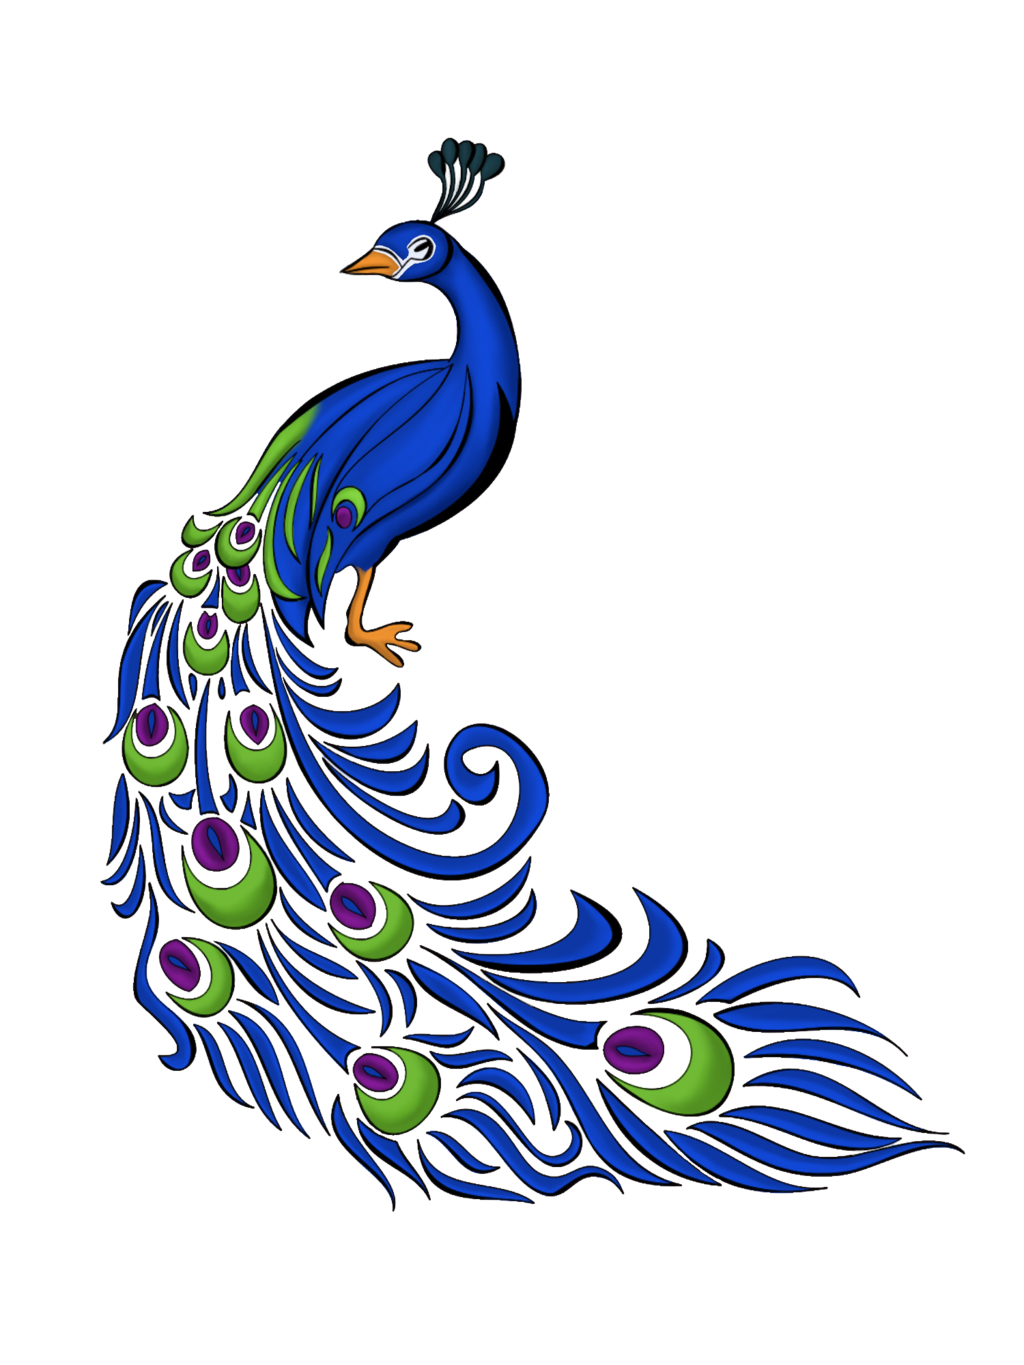 Peacock Images Art.